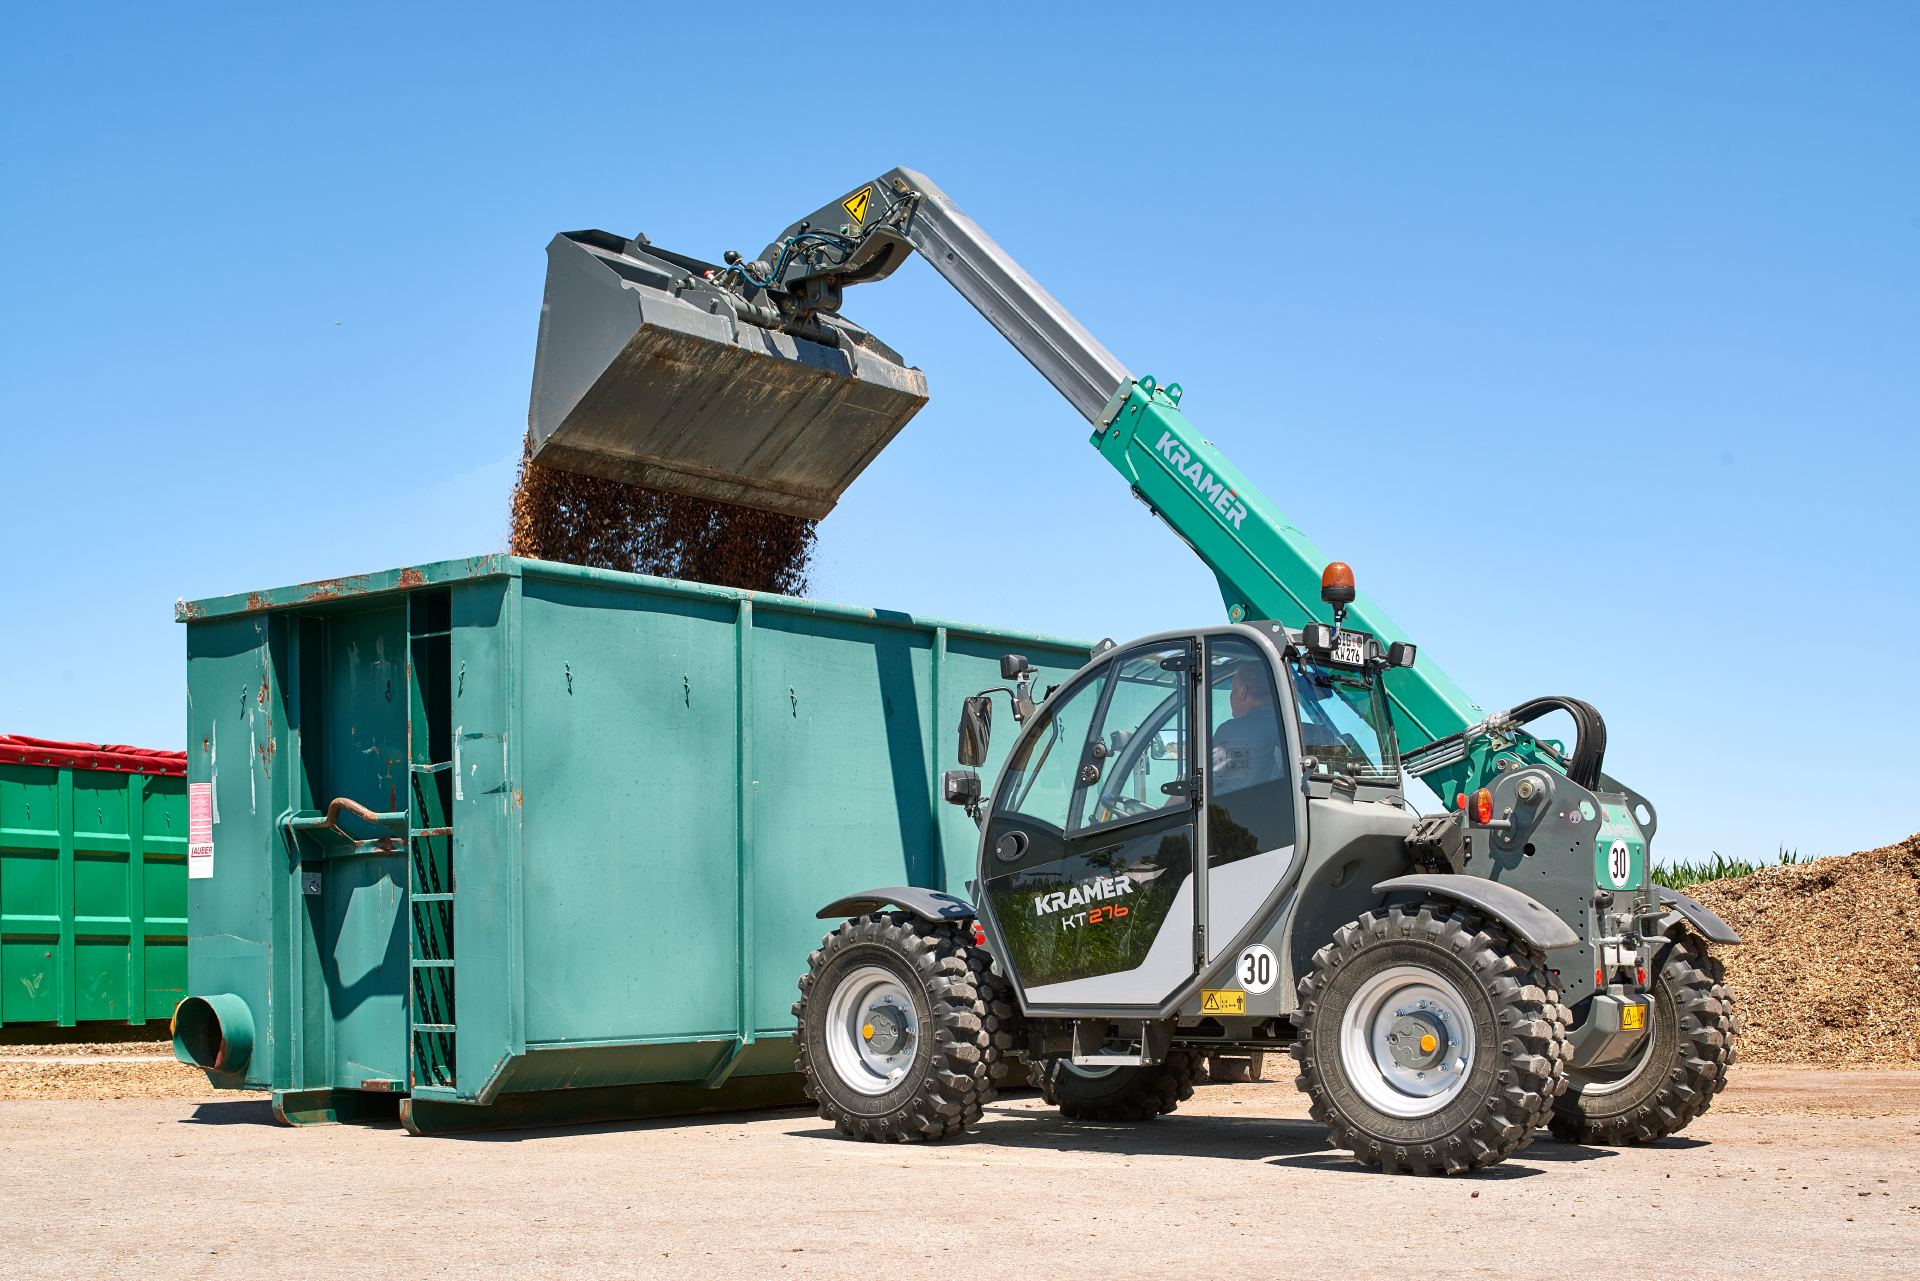 The Kramer telehandler KT276 while loading a container.